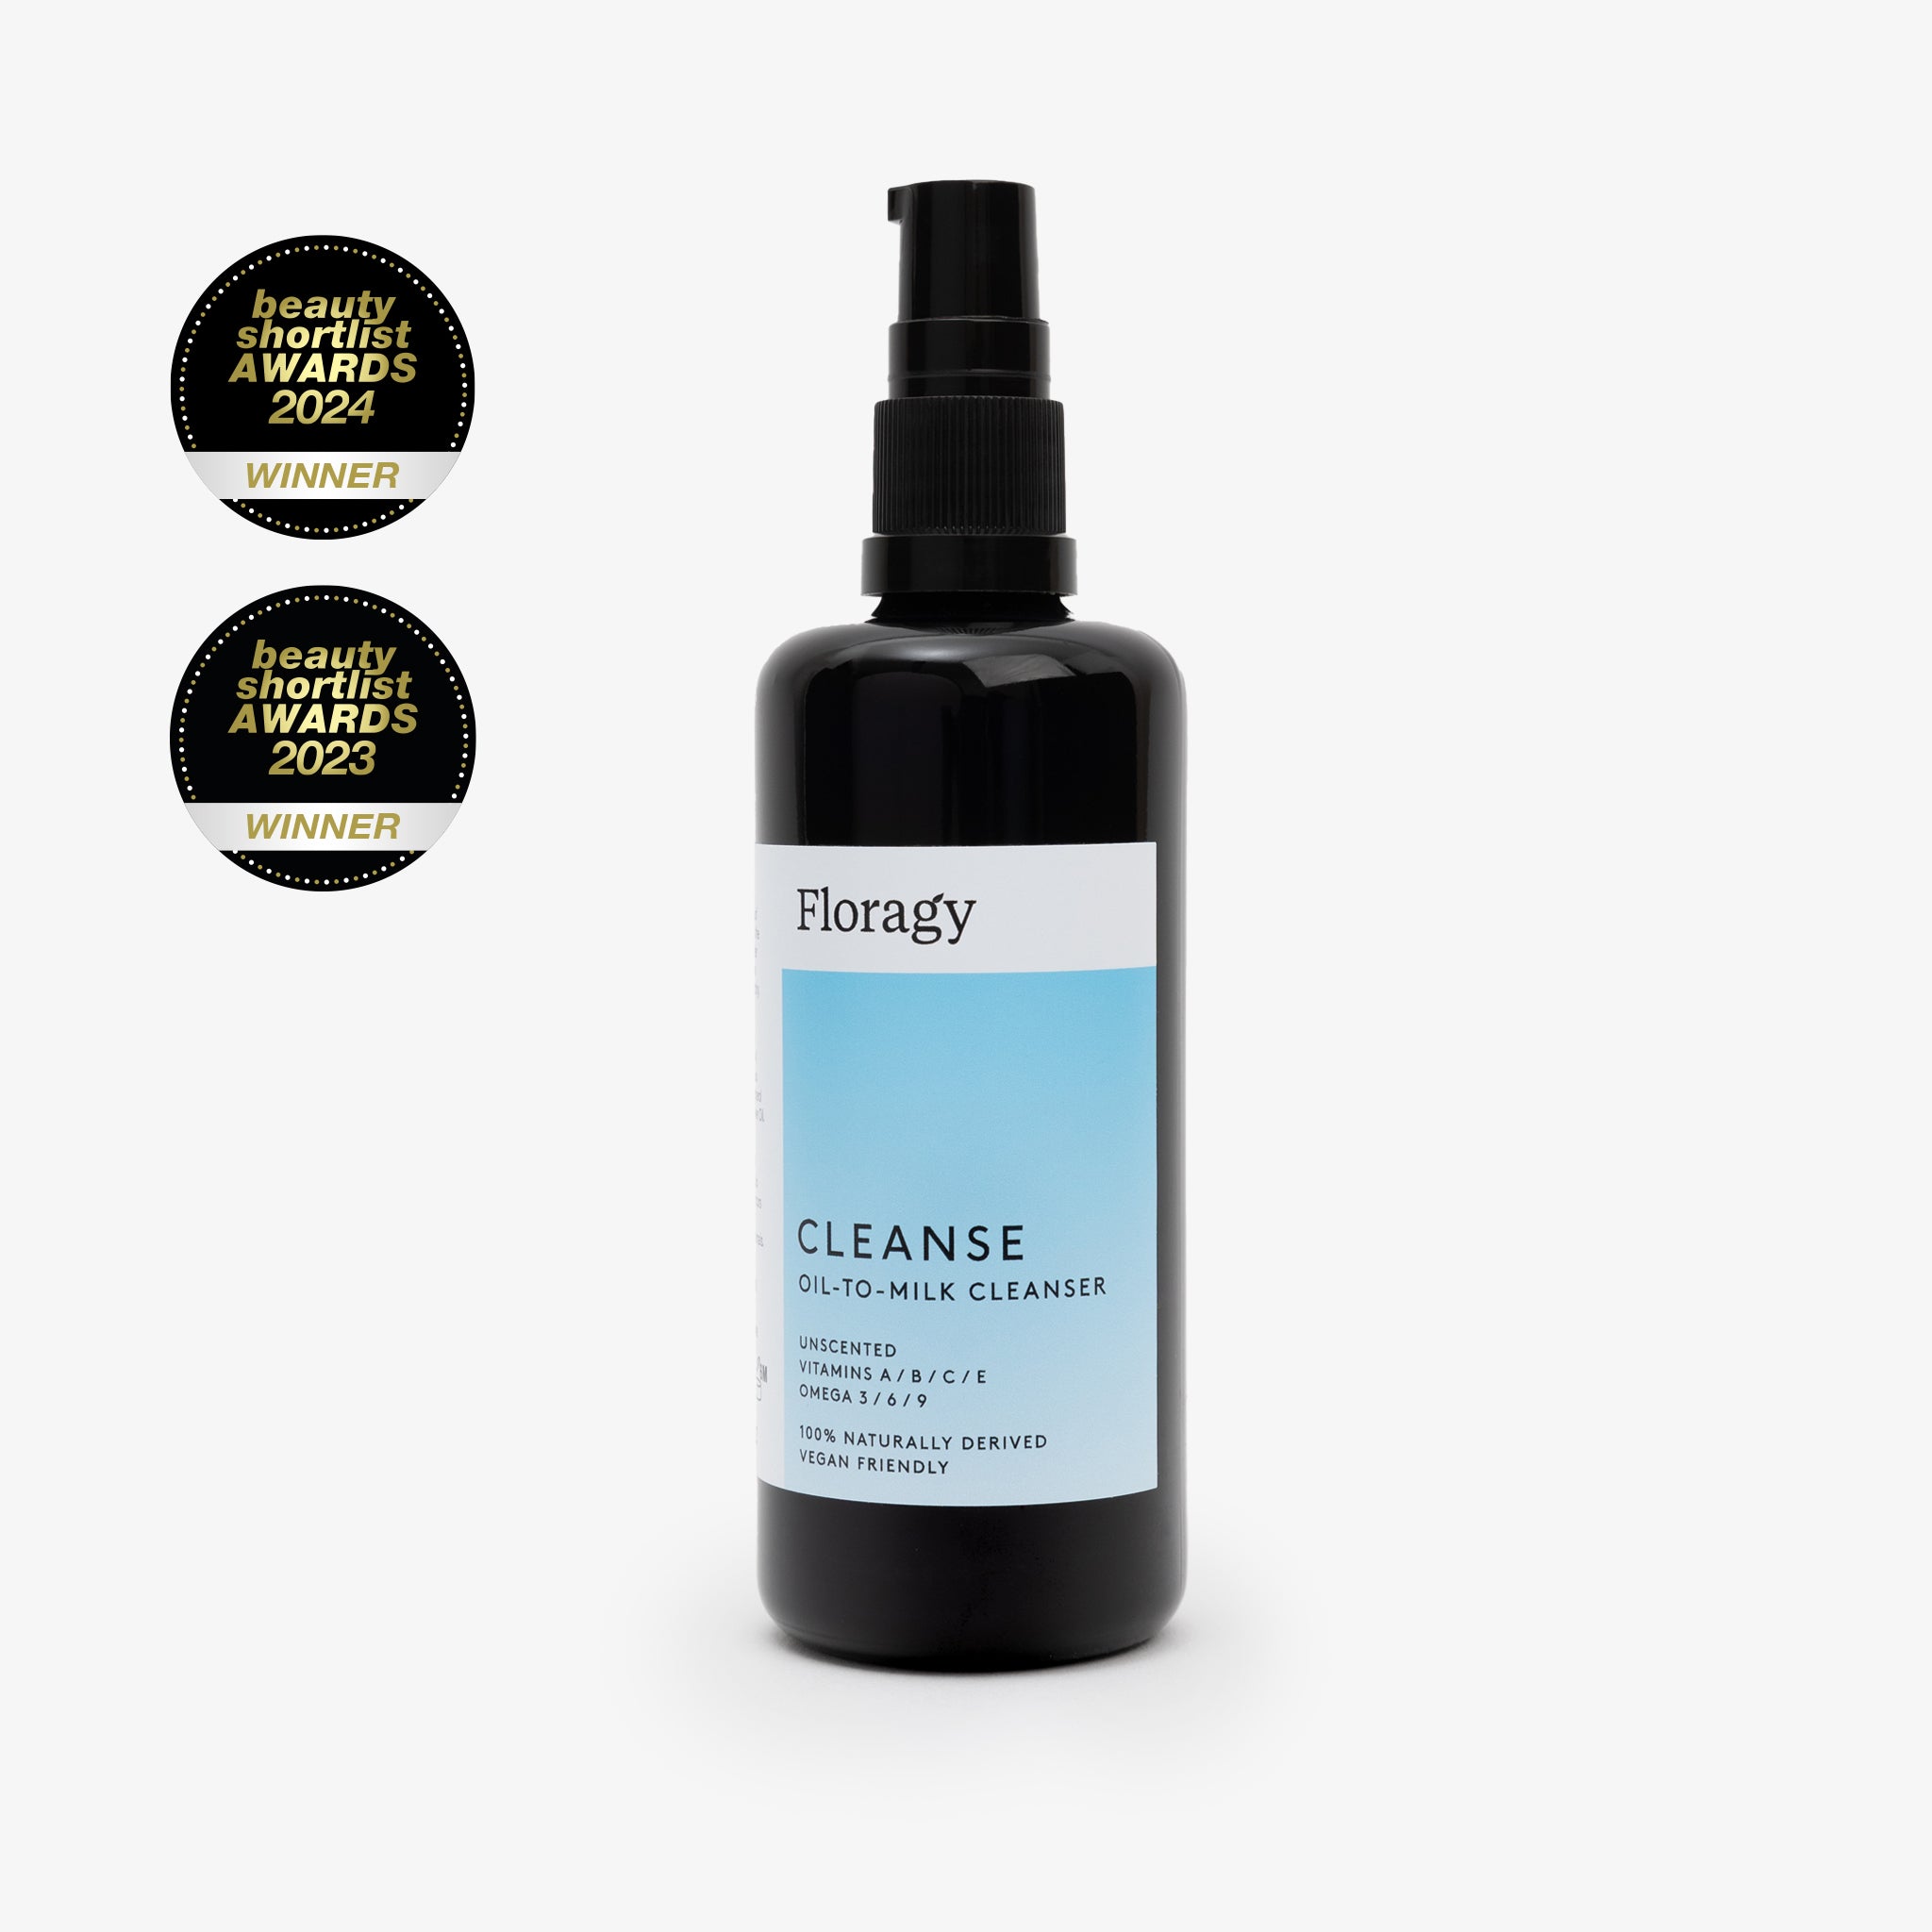 Cleanse – Oil-to-milk Cleanser